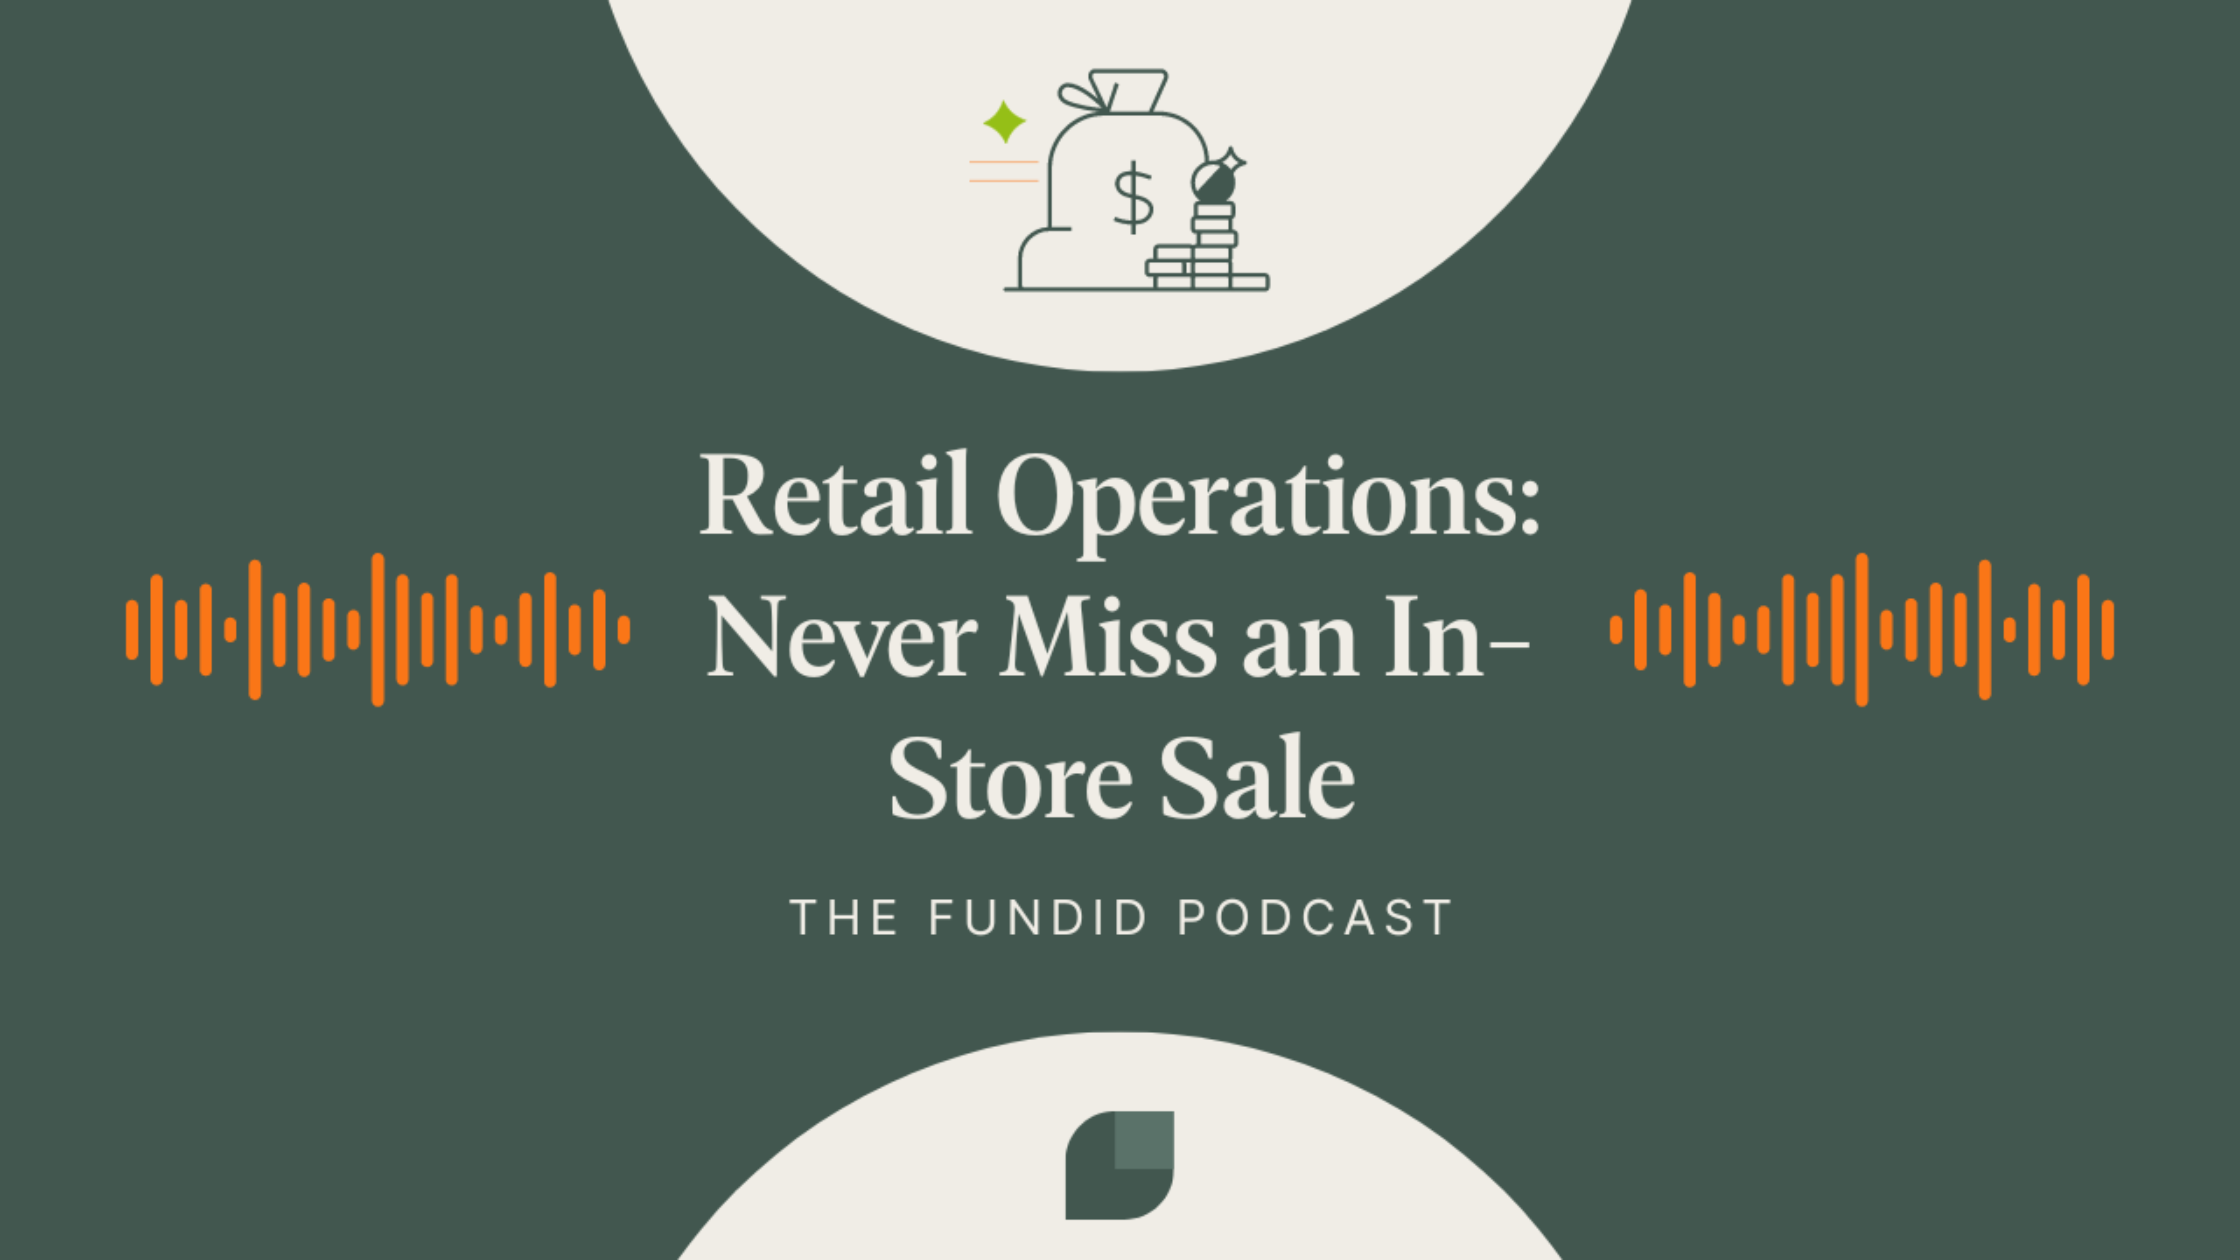 Retail Operations: Never Miss an In-Store Sale | The Fundid Podcast